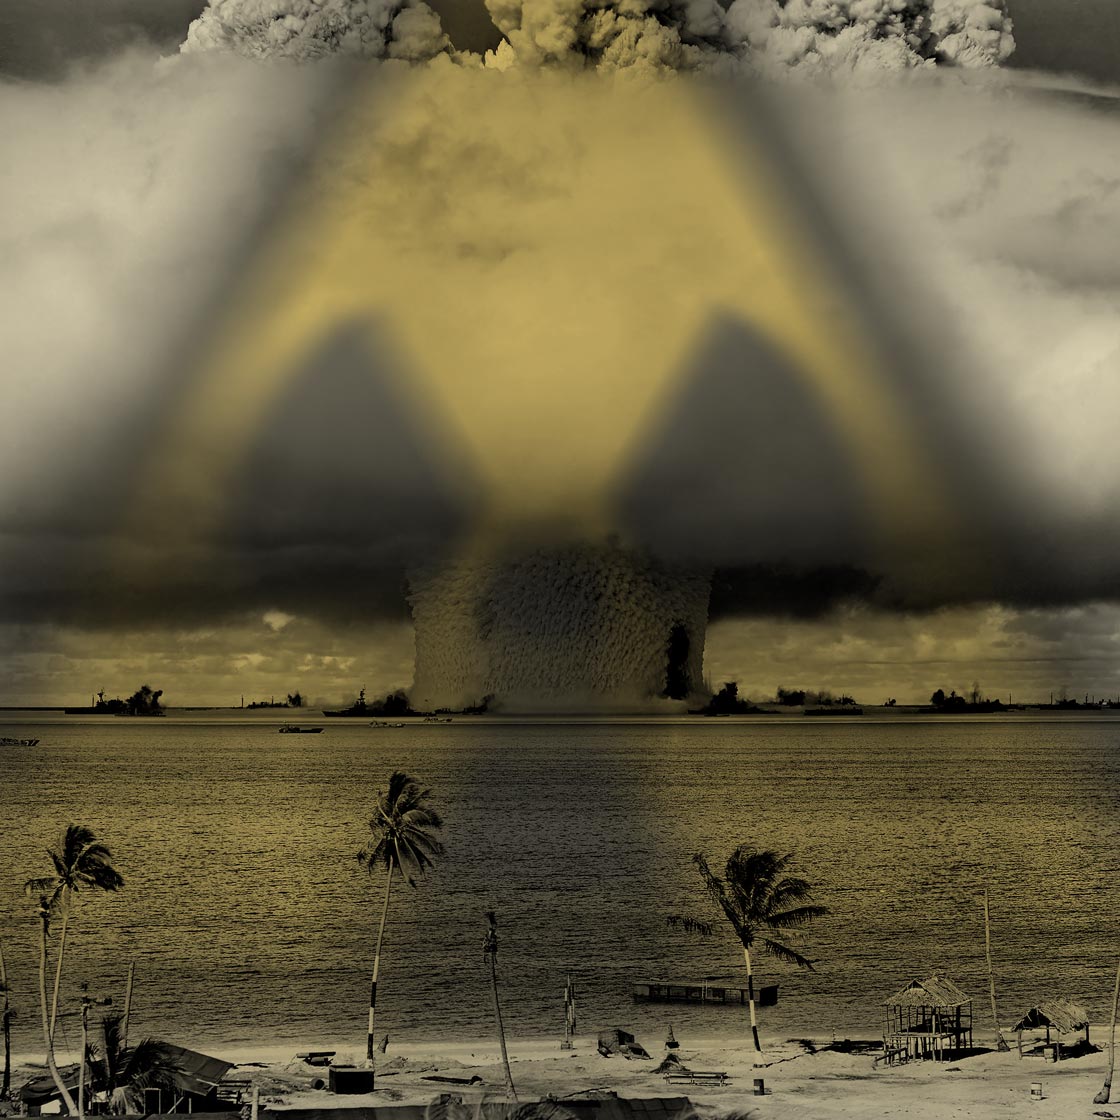 Baker Shot, part of Operation Crossroads, a nuclear test by the United States at Bikini Atoll in 1946 (https://en.wikipedia.org/wiki/Nuclear_weapons_testing#/media/File:Operation_Crossroads_Baker_Edit.jpg)